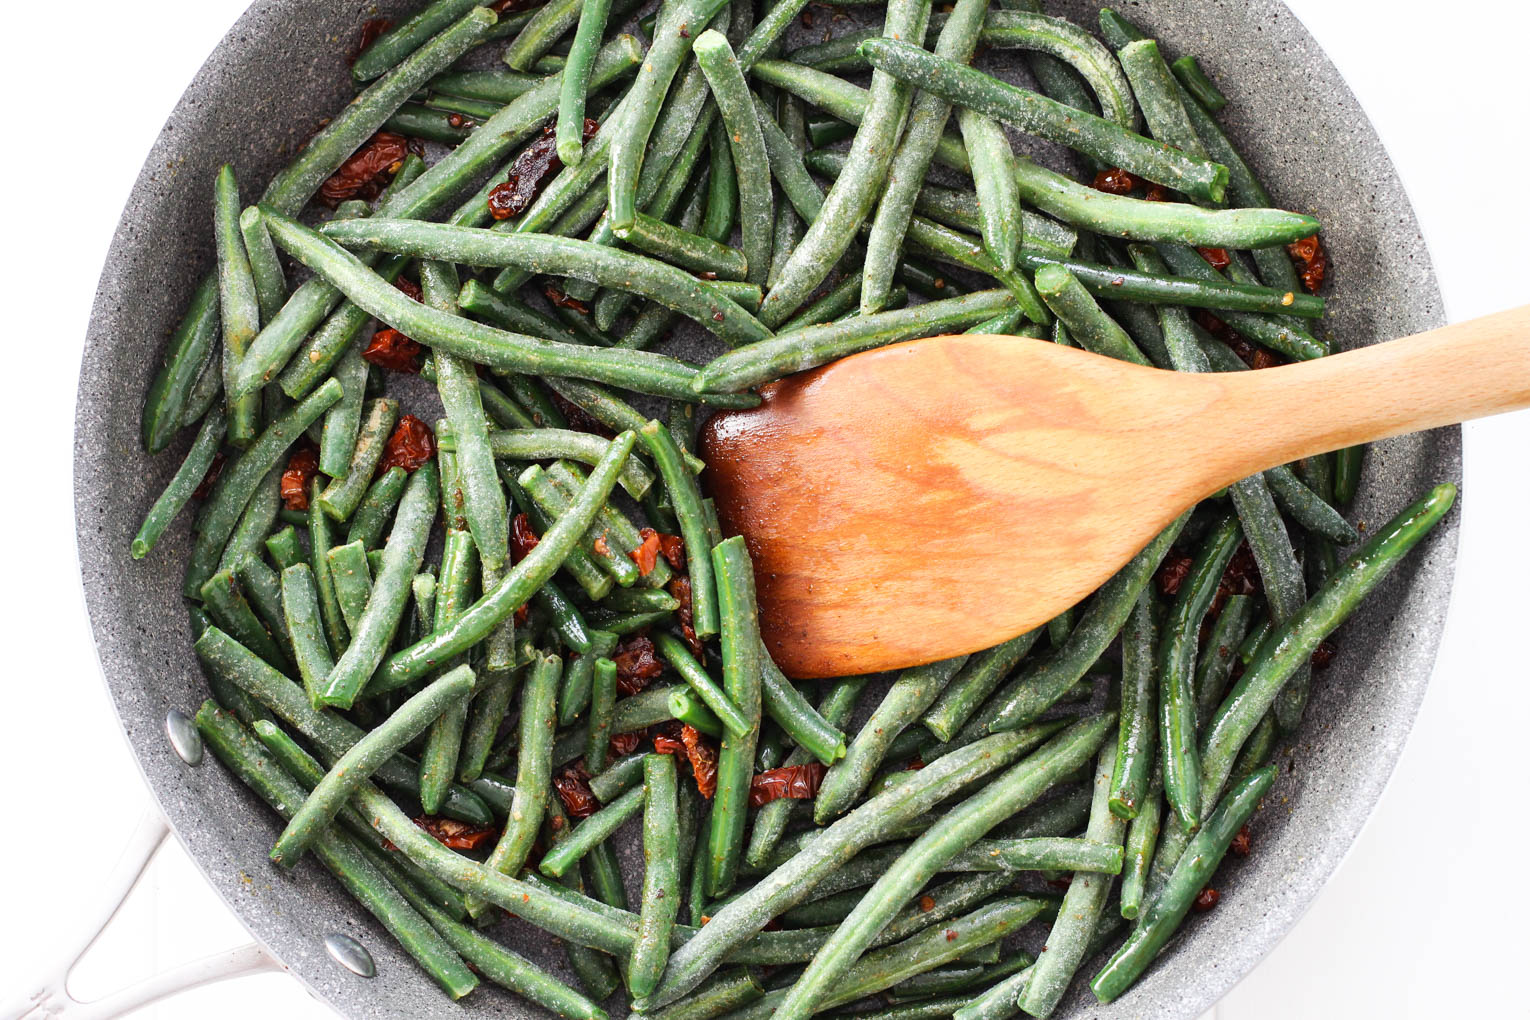 Frozen green beans in a skillet being mixed with sun-dried tomatoes with a wooden spatula.